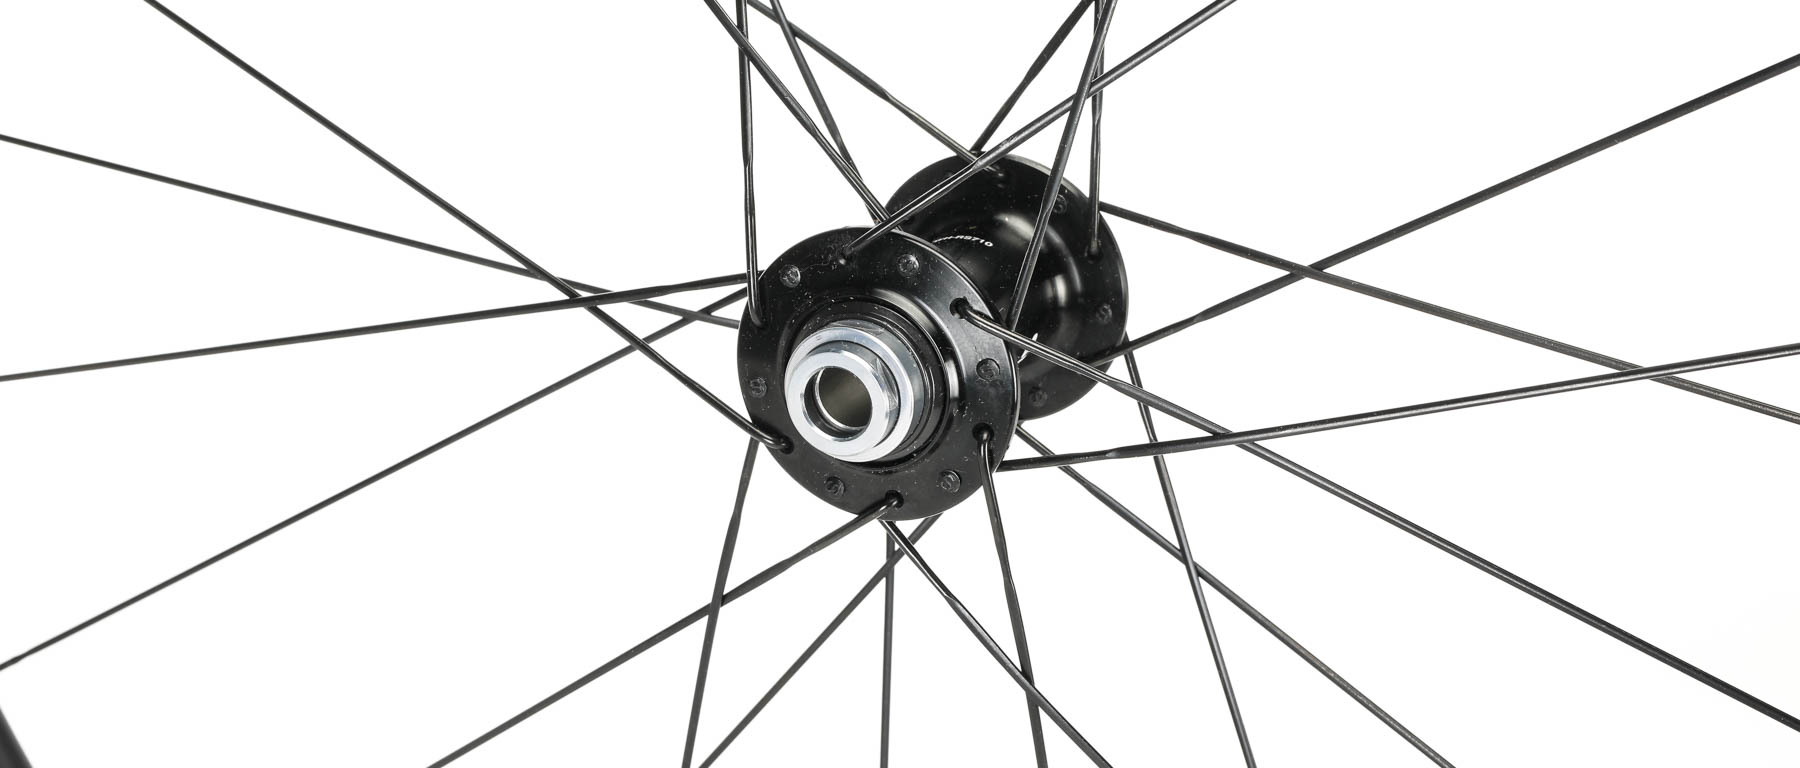 Shimano WH-RS710-C46-TL Wheelset